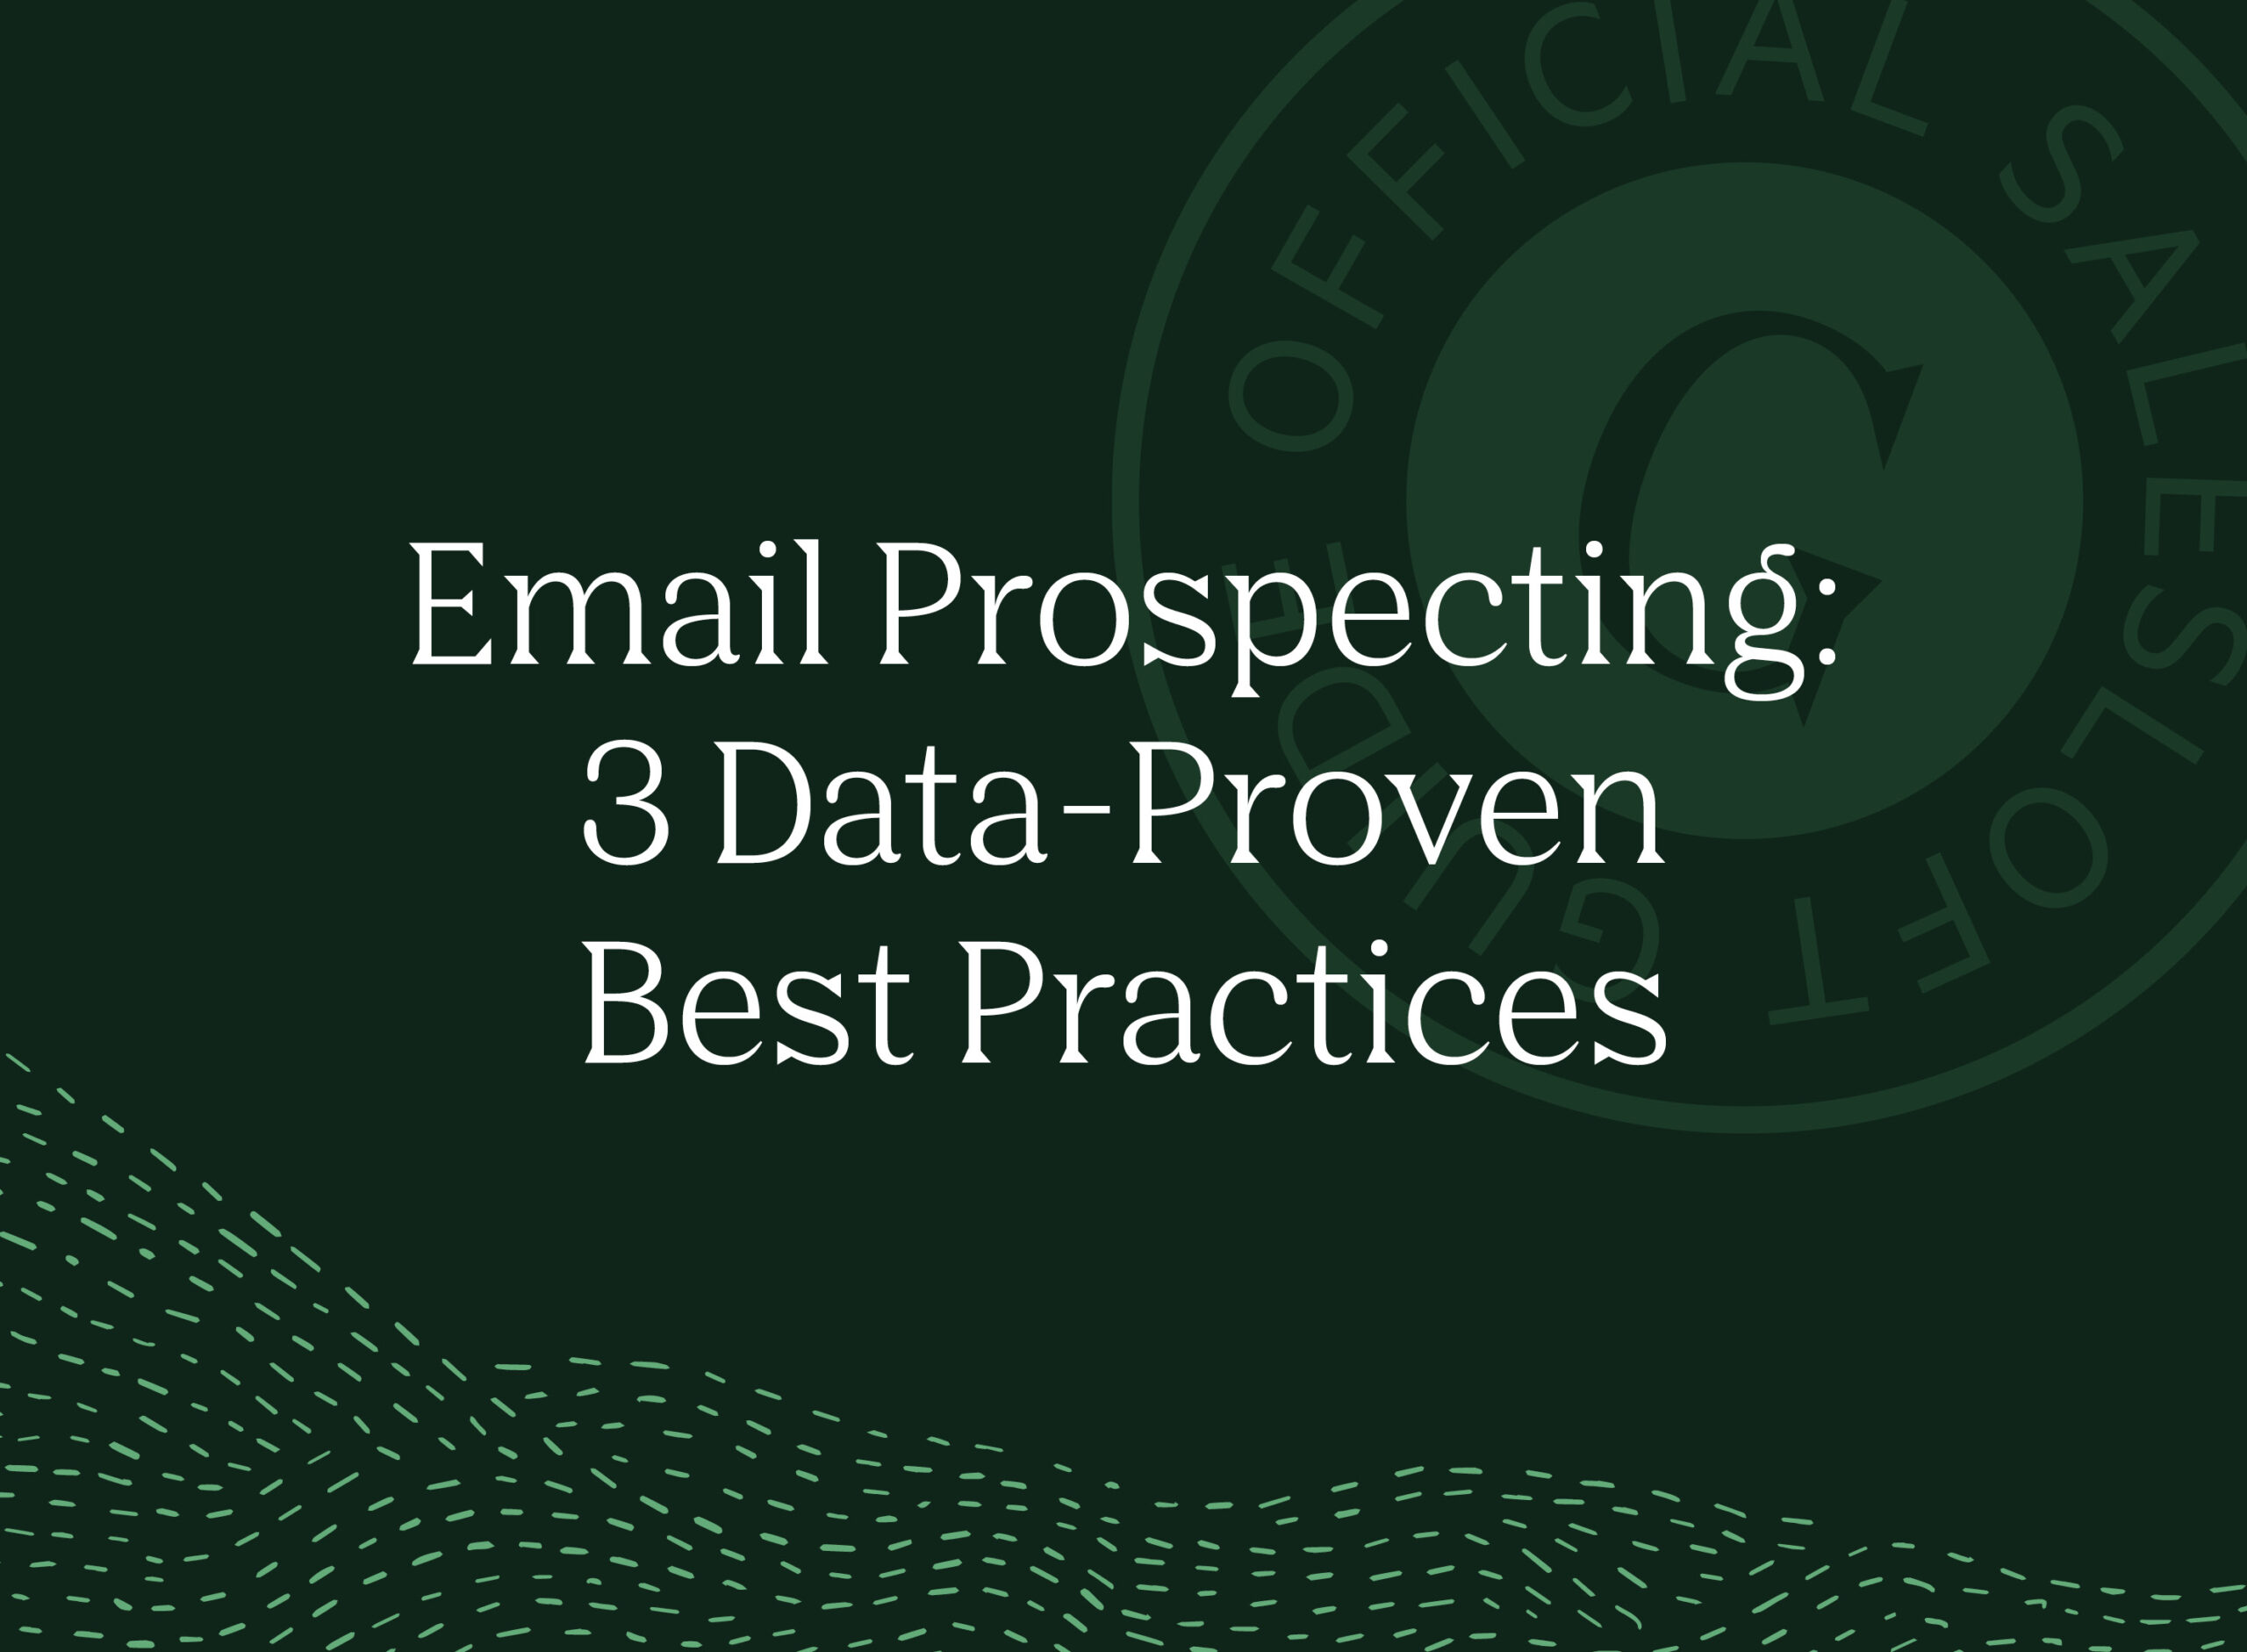 Email Prospecting 3 Data-Proven Best Practices (1)